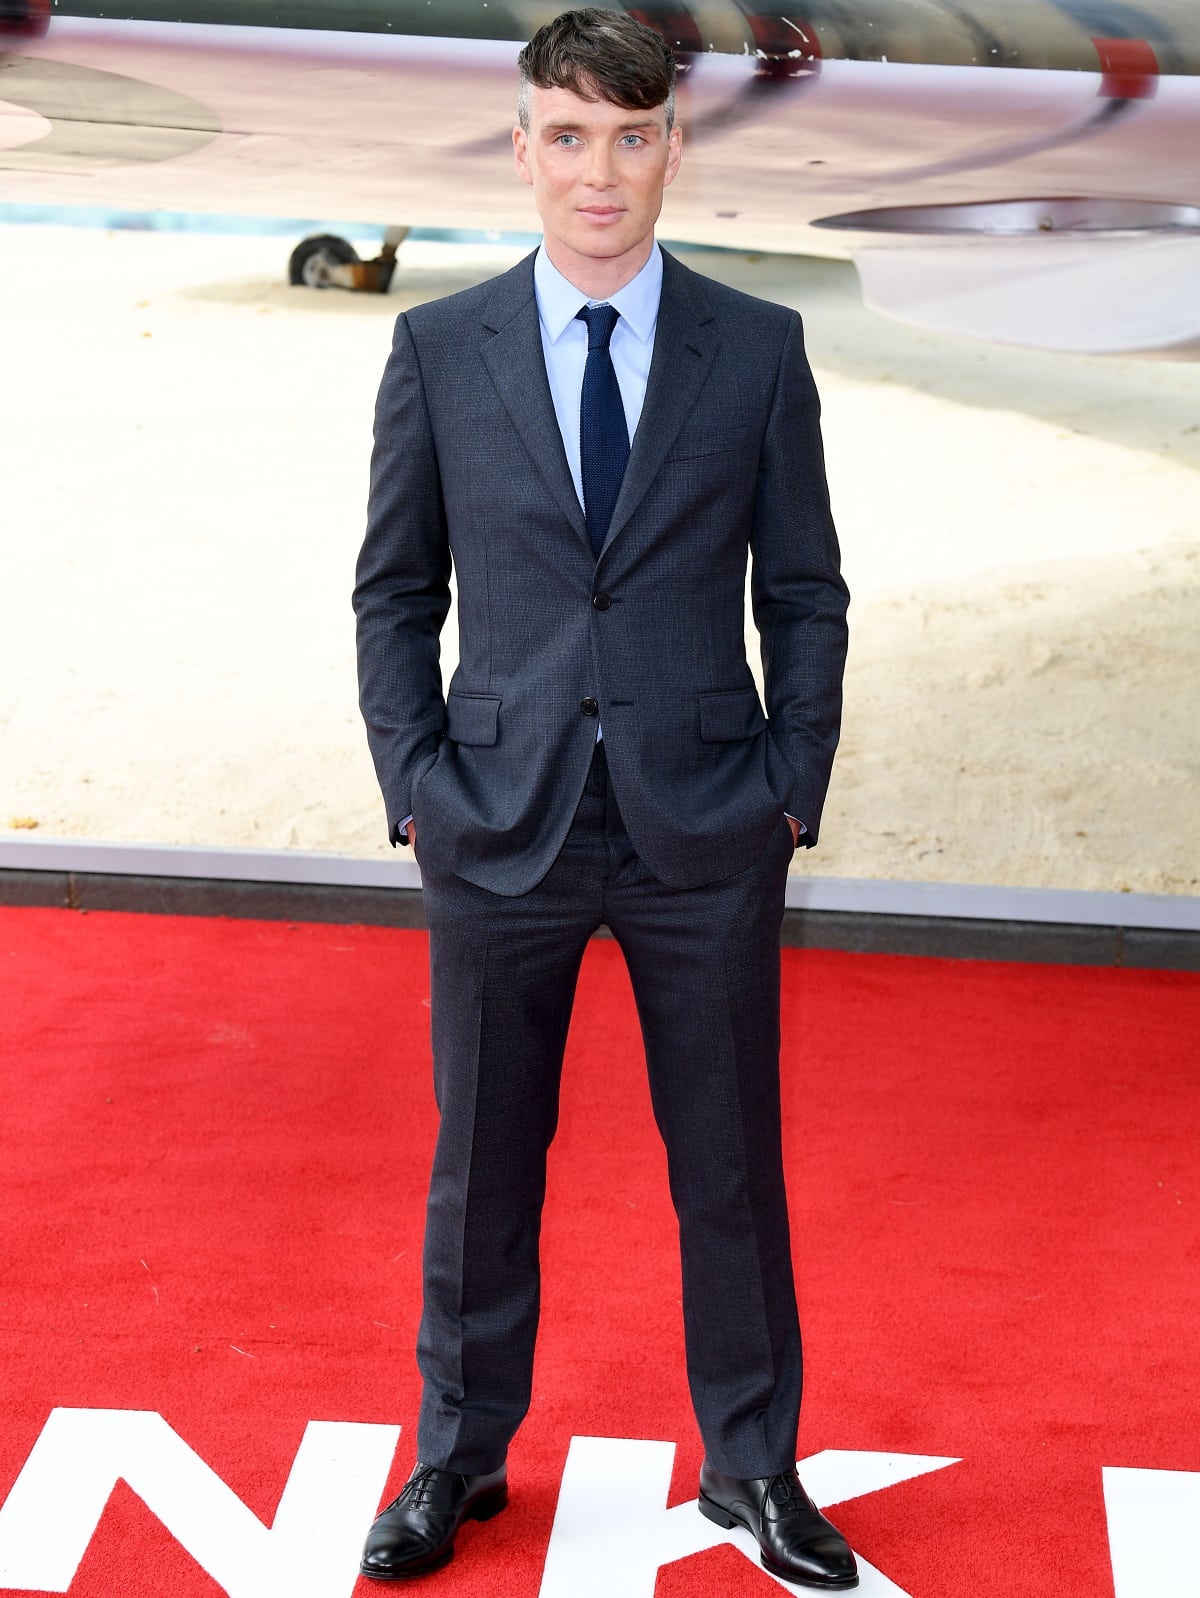 Cillian Murphy at the world premiere of Dunkirk